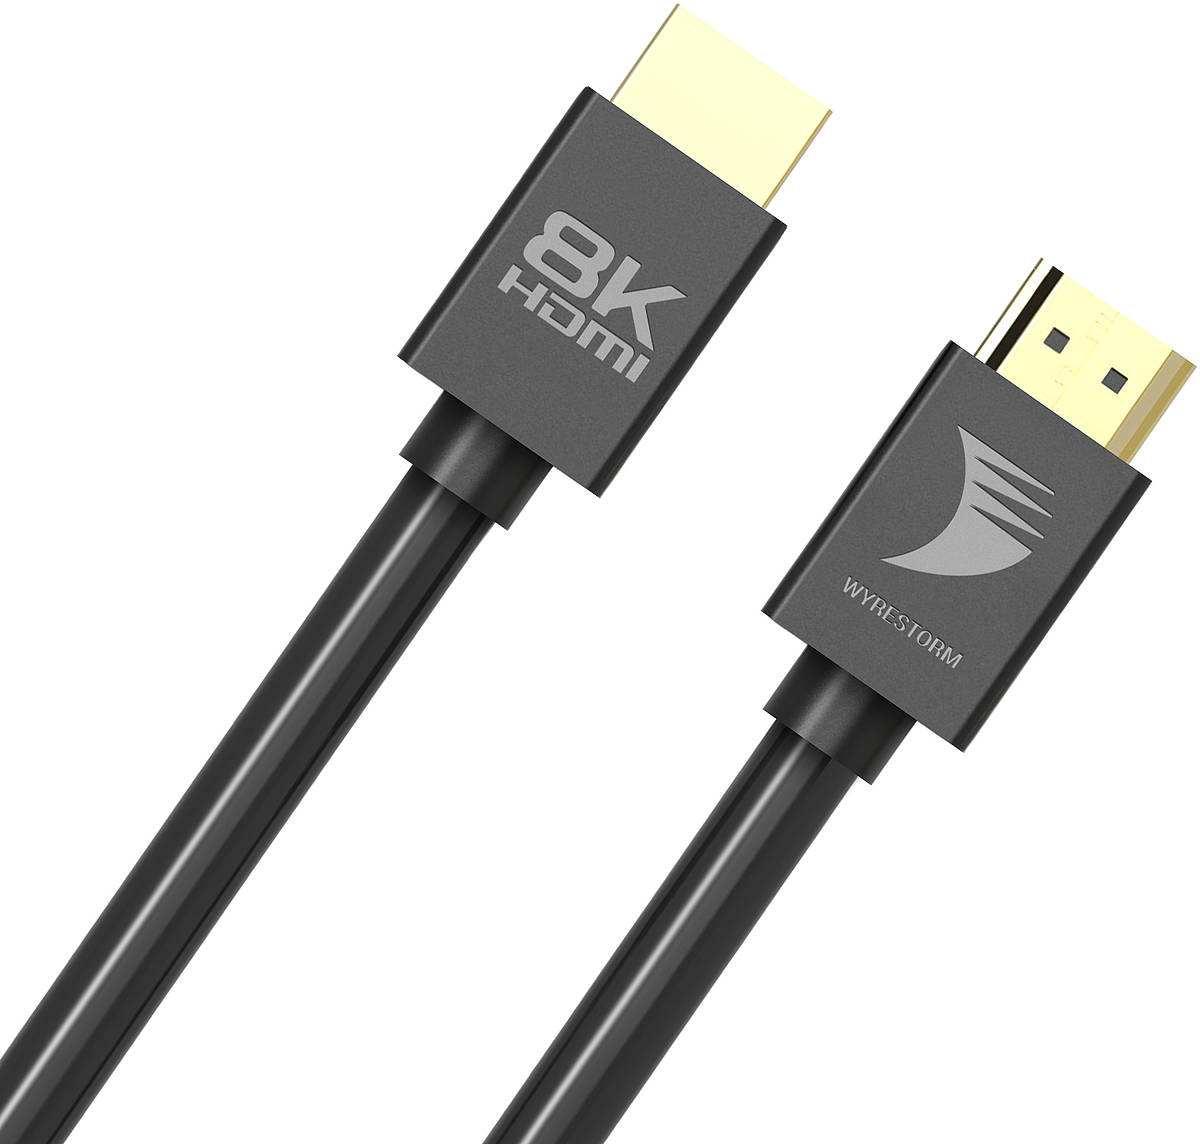 EXP-HDMI-2M-8K 2.00m WyreStorm 8K 60 HDMI 2.1 cable product image. Click to enlarge.